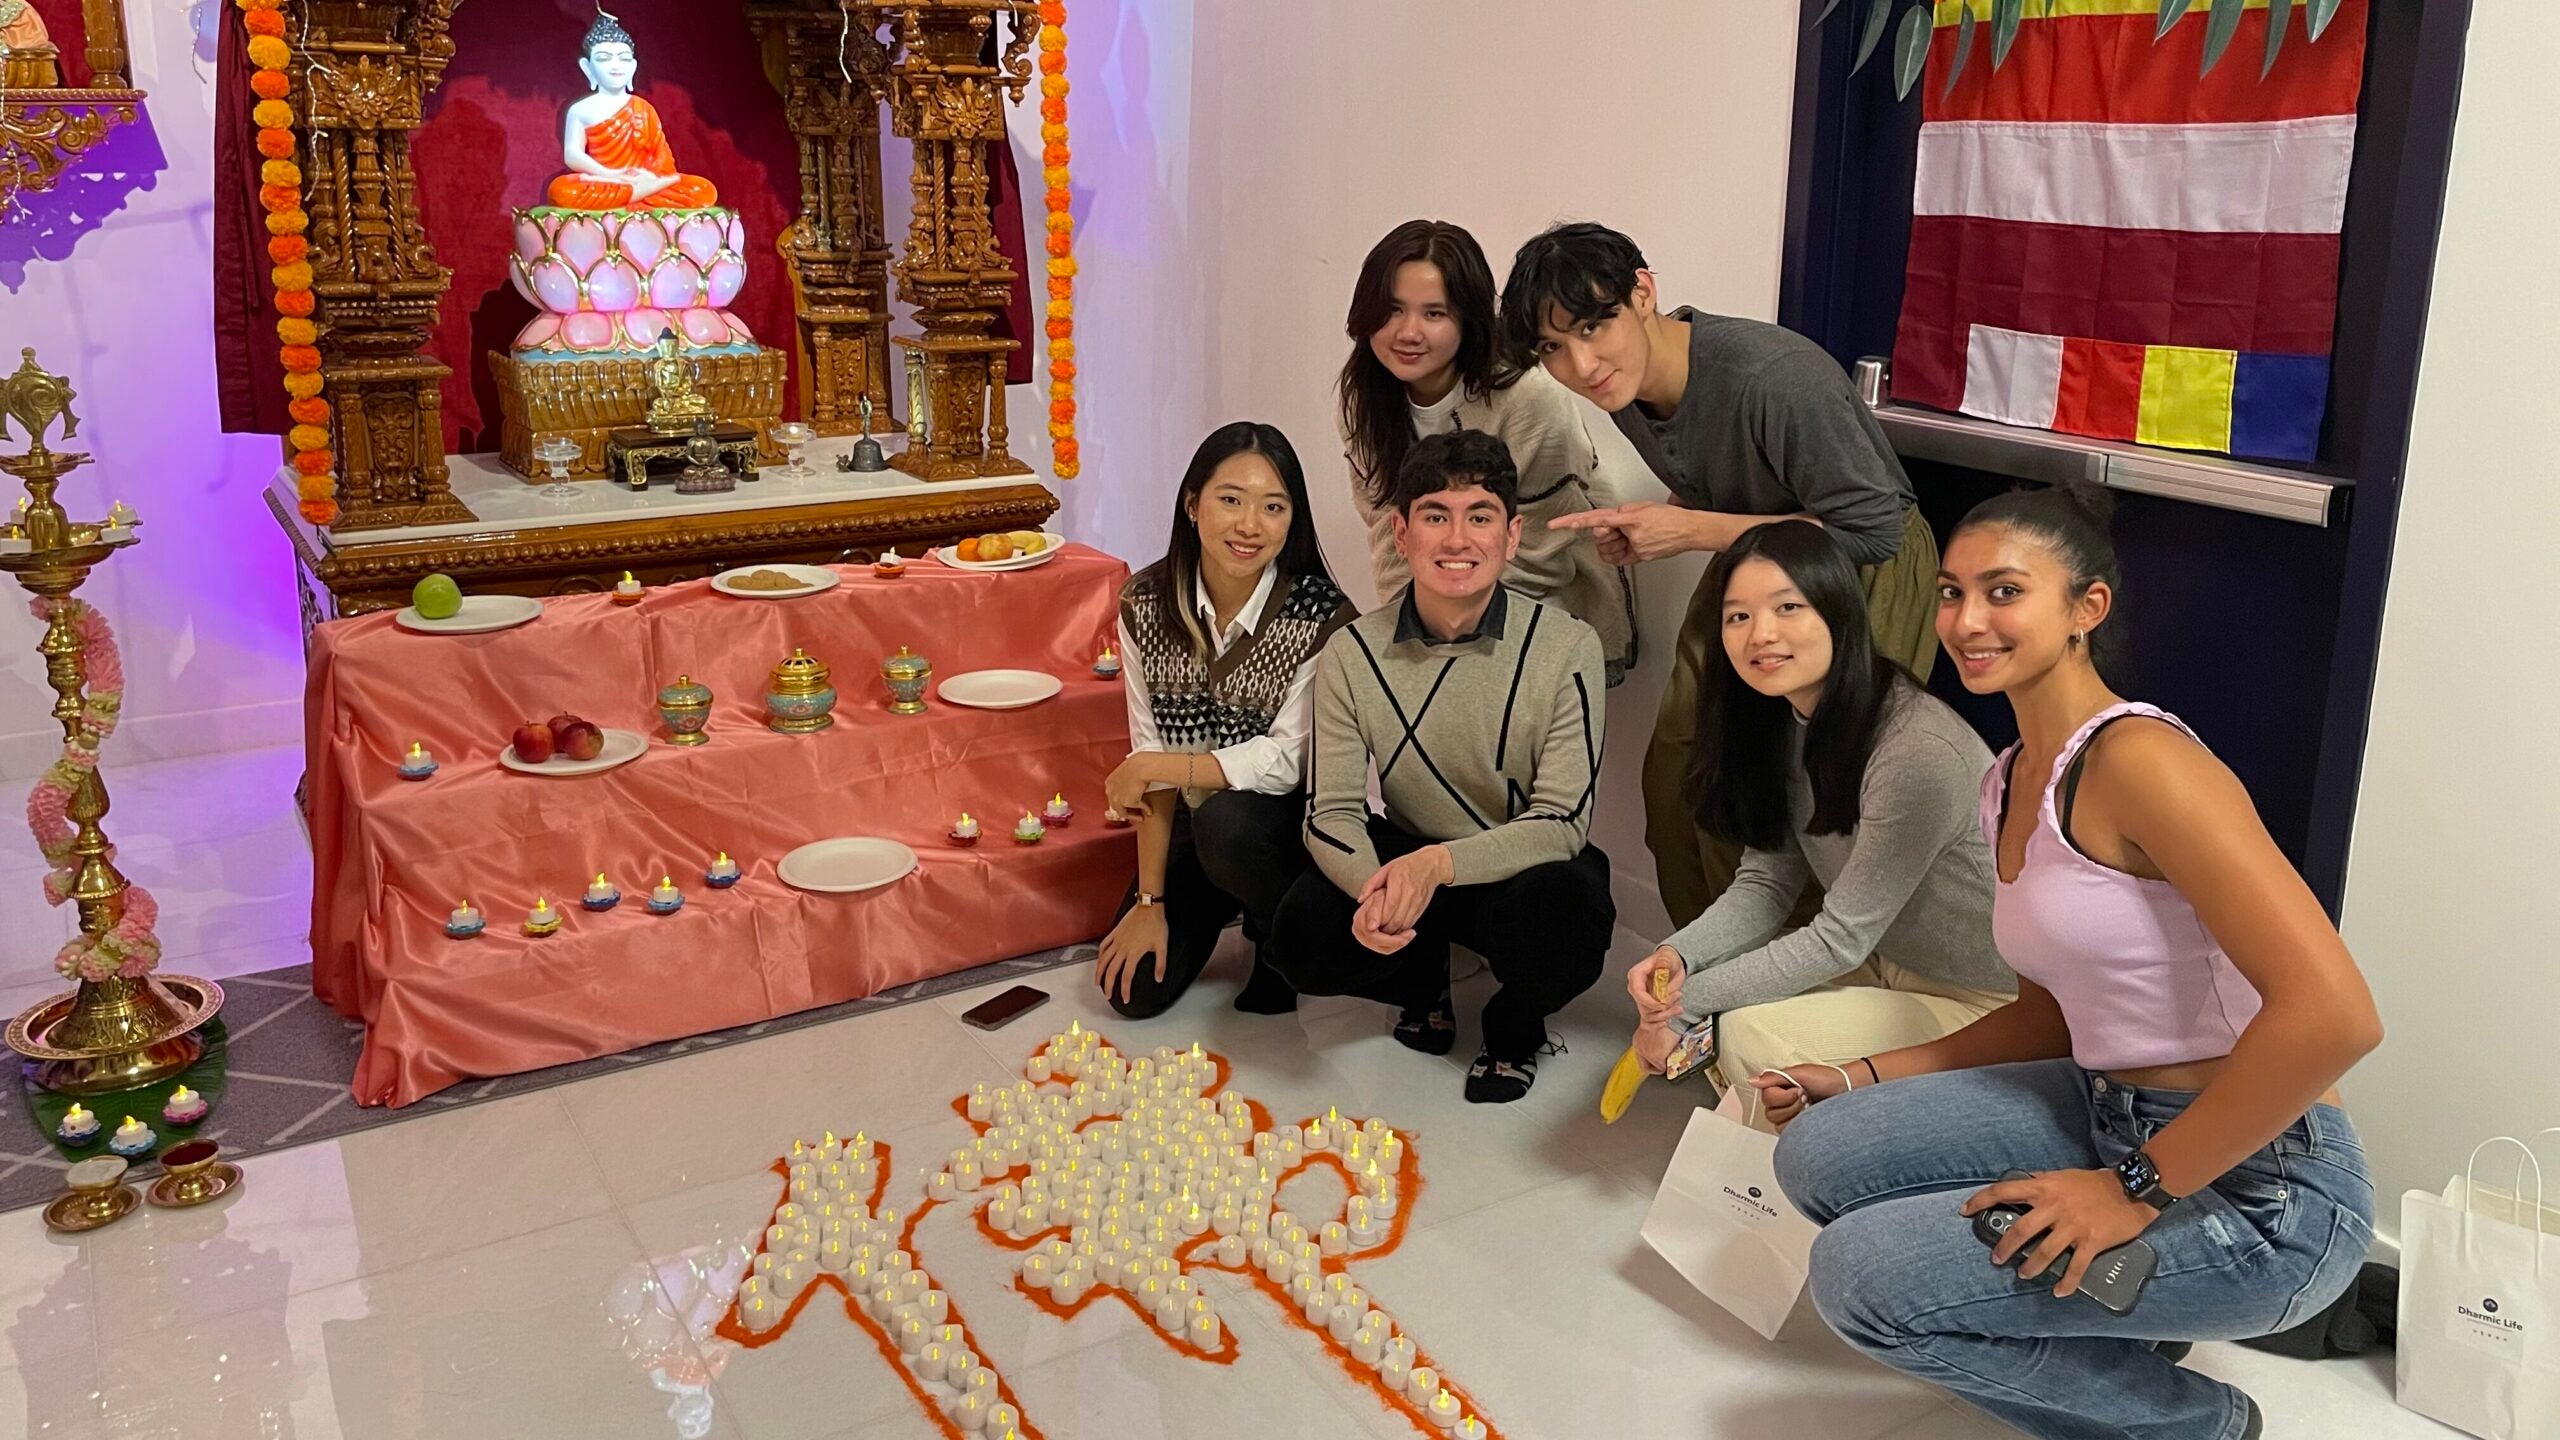 A group of students in front of a Buddhist shrine, kneeling before a display of candles.